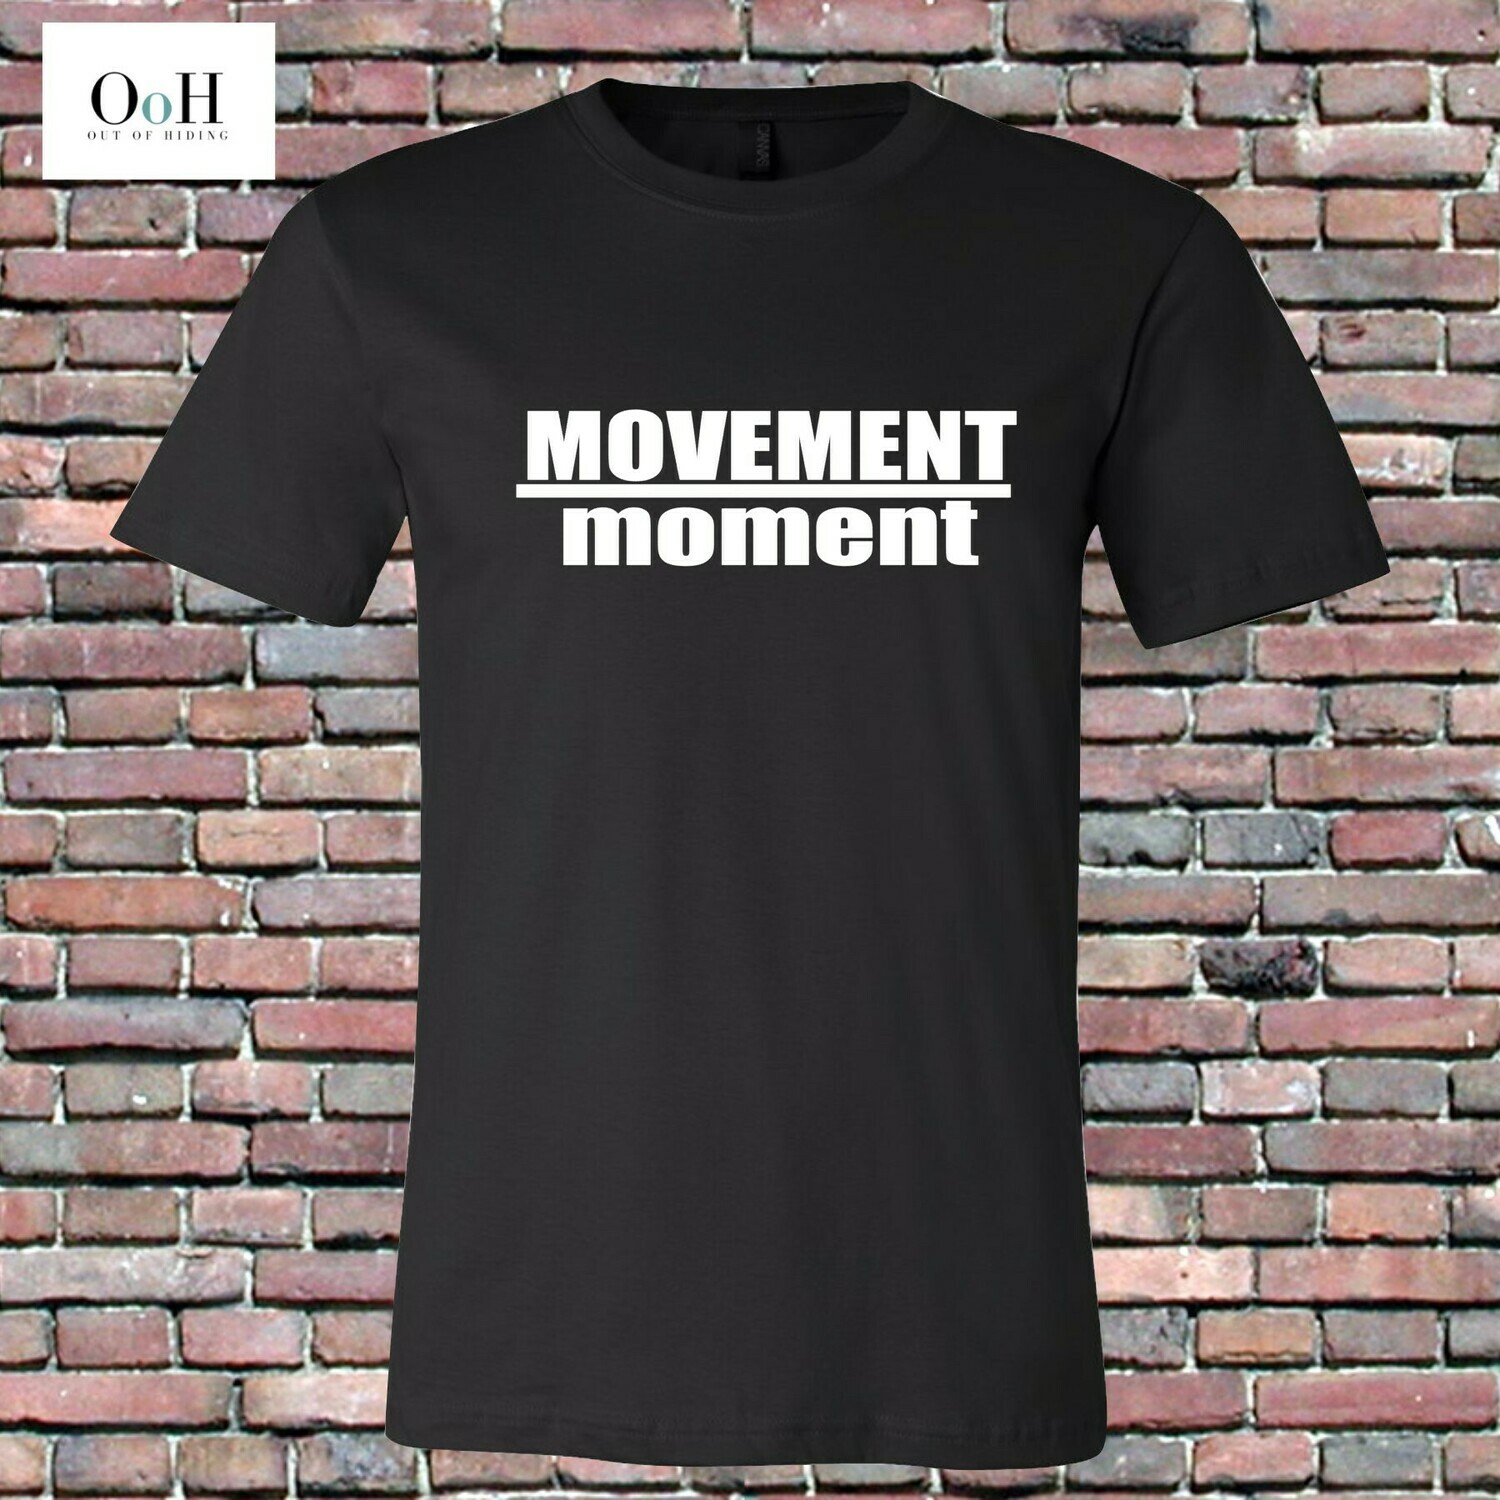 MOVEMENT over moment